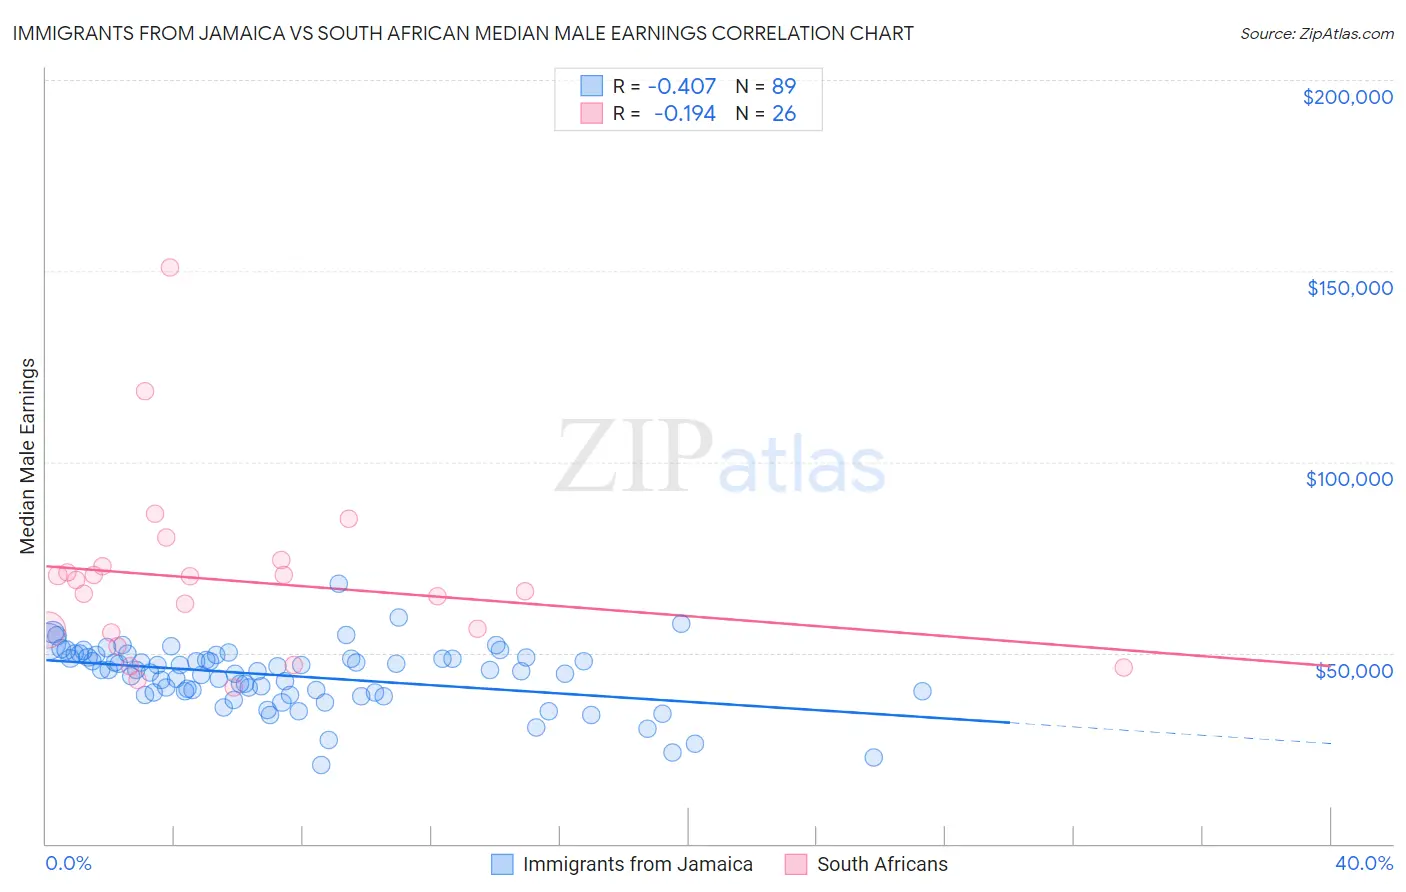 Immigrants from Jamaica vs South African Median Male Earnings